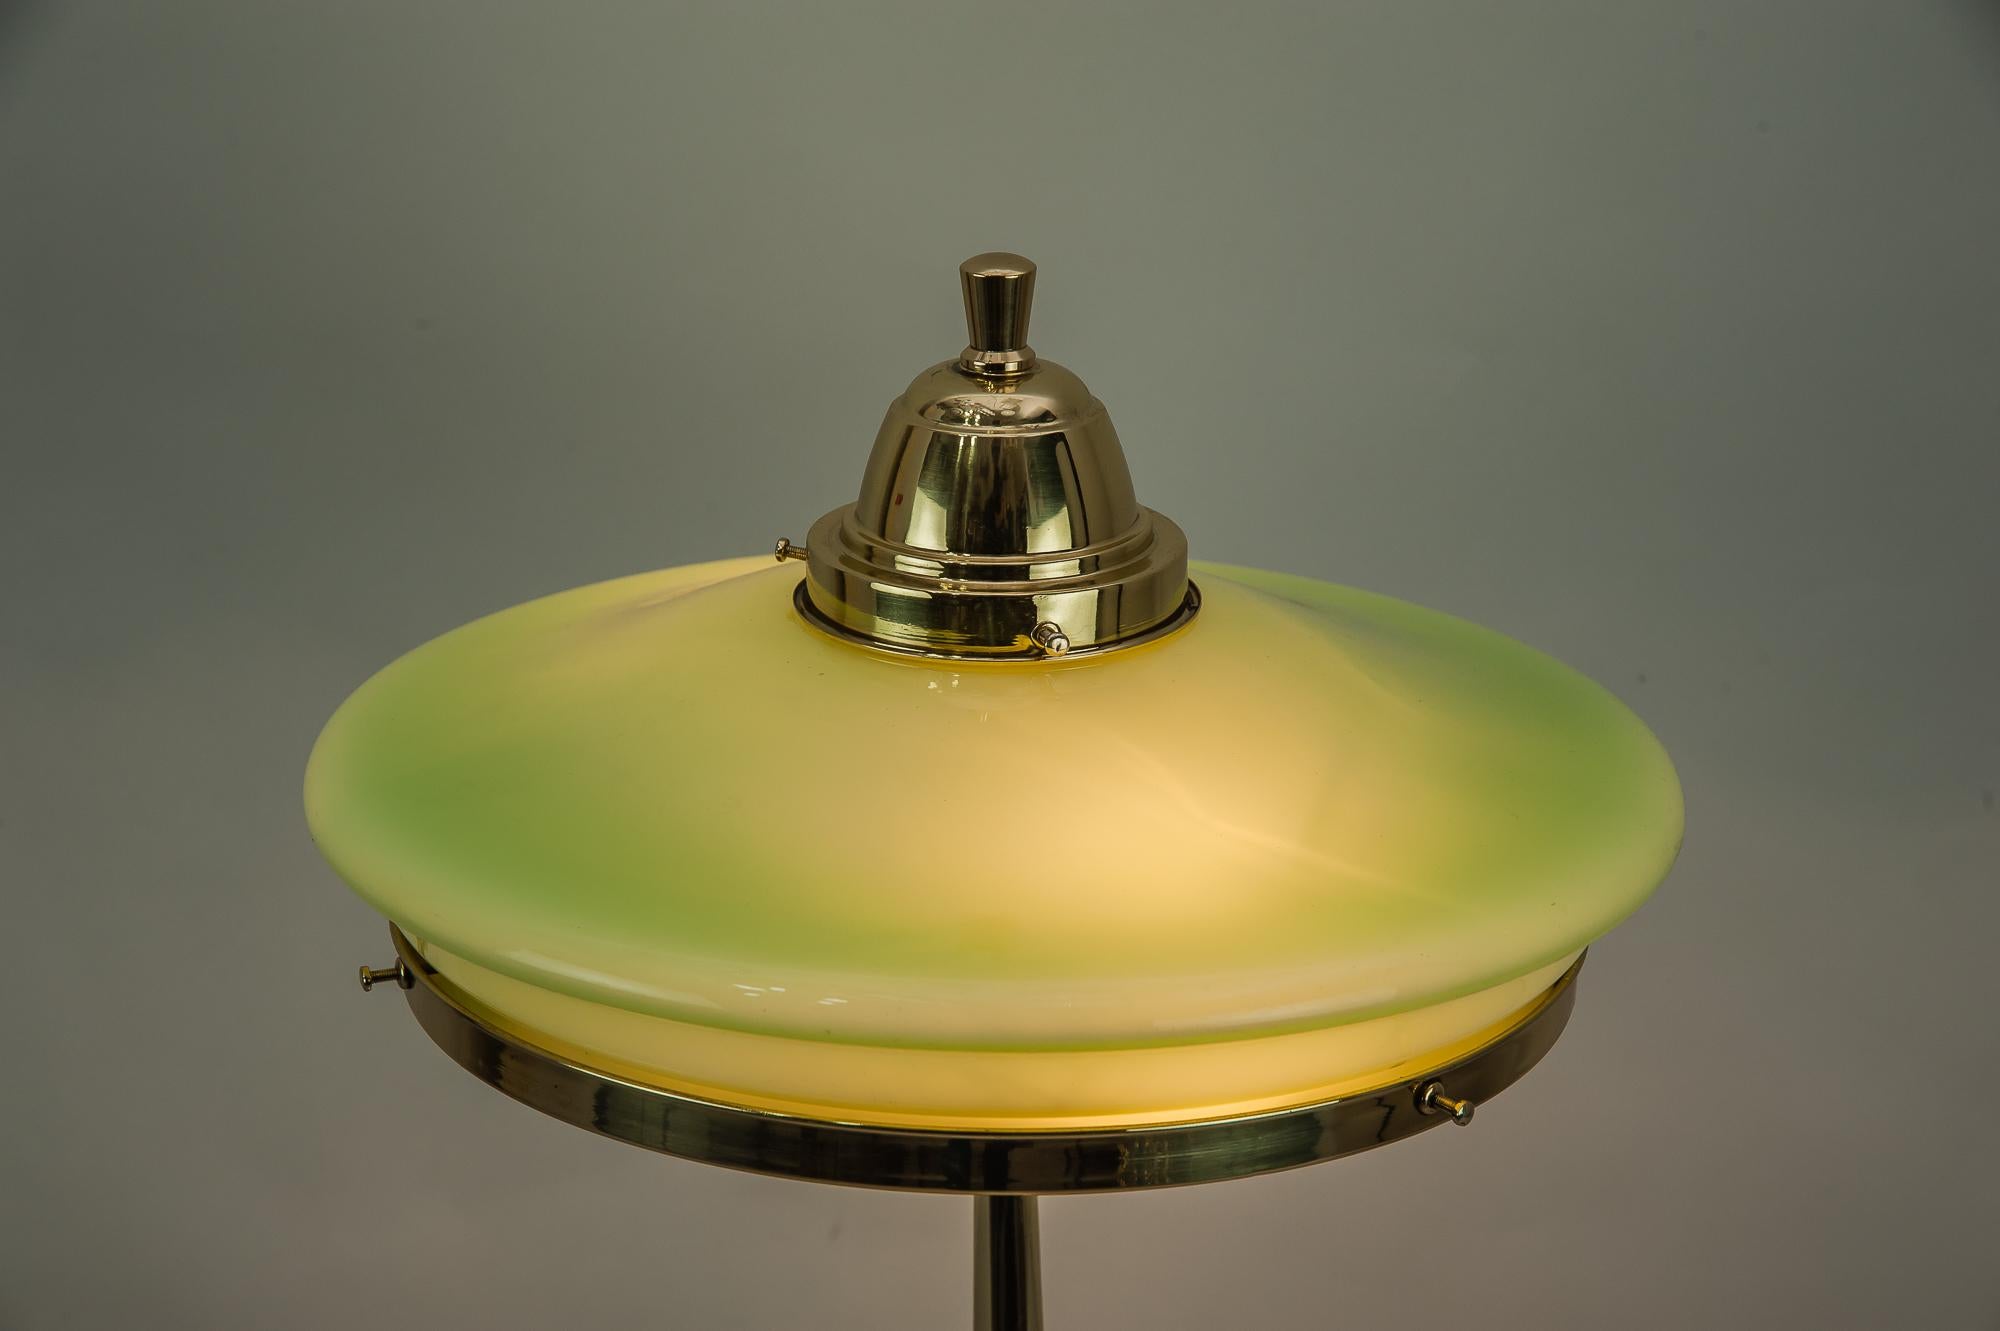 Early 20th Century Jugendstil Table Lamp circa 1910s with Original Glass